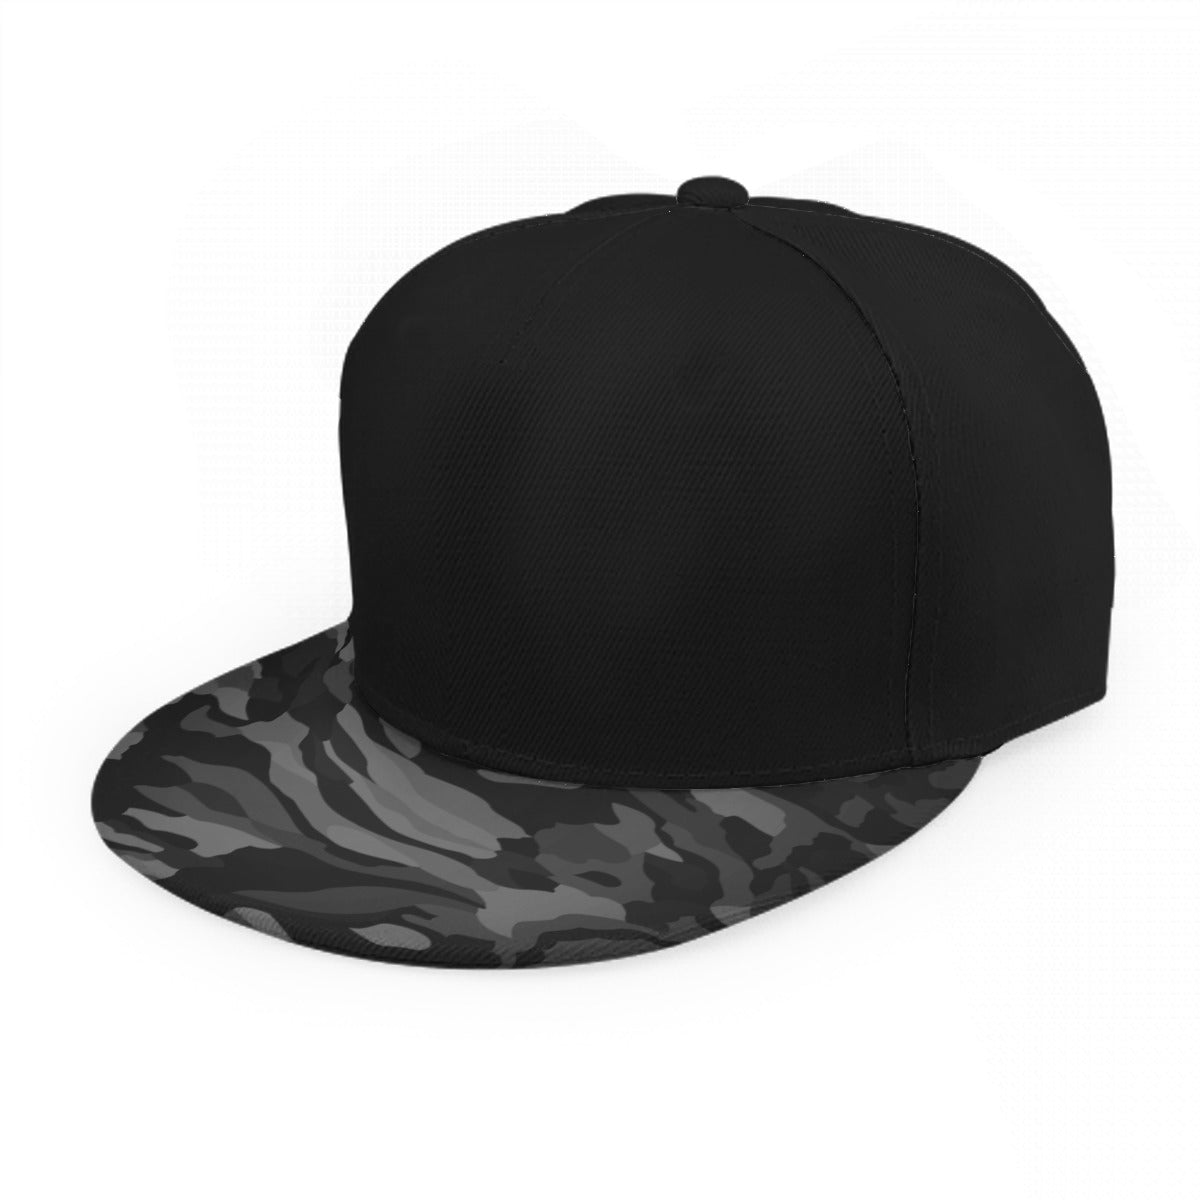 BLK Camouflage Baseball Cap With Flat Brim